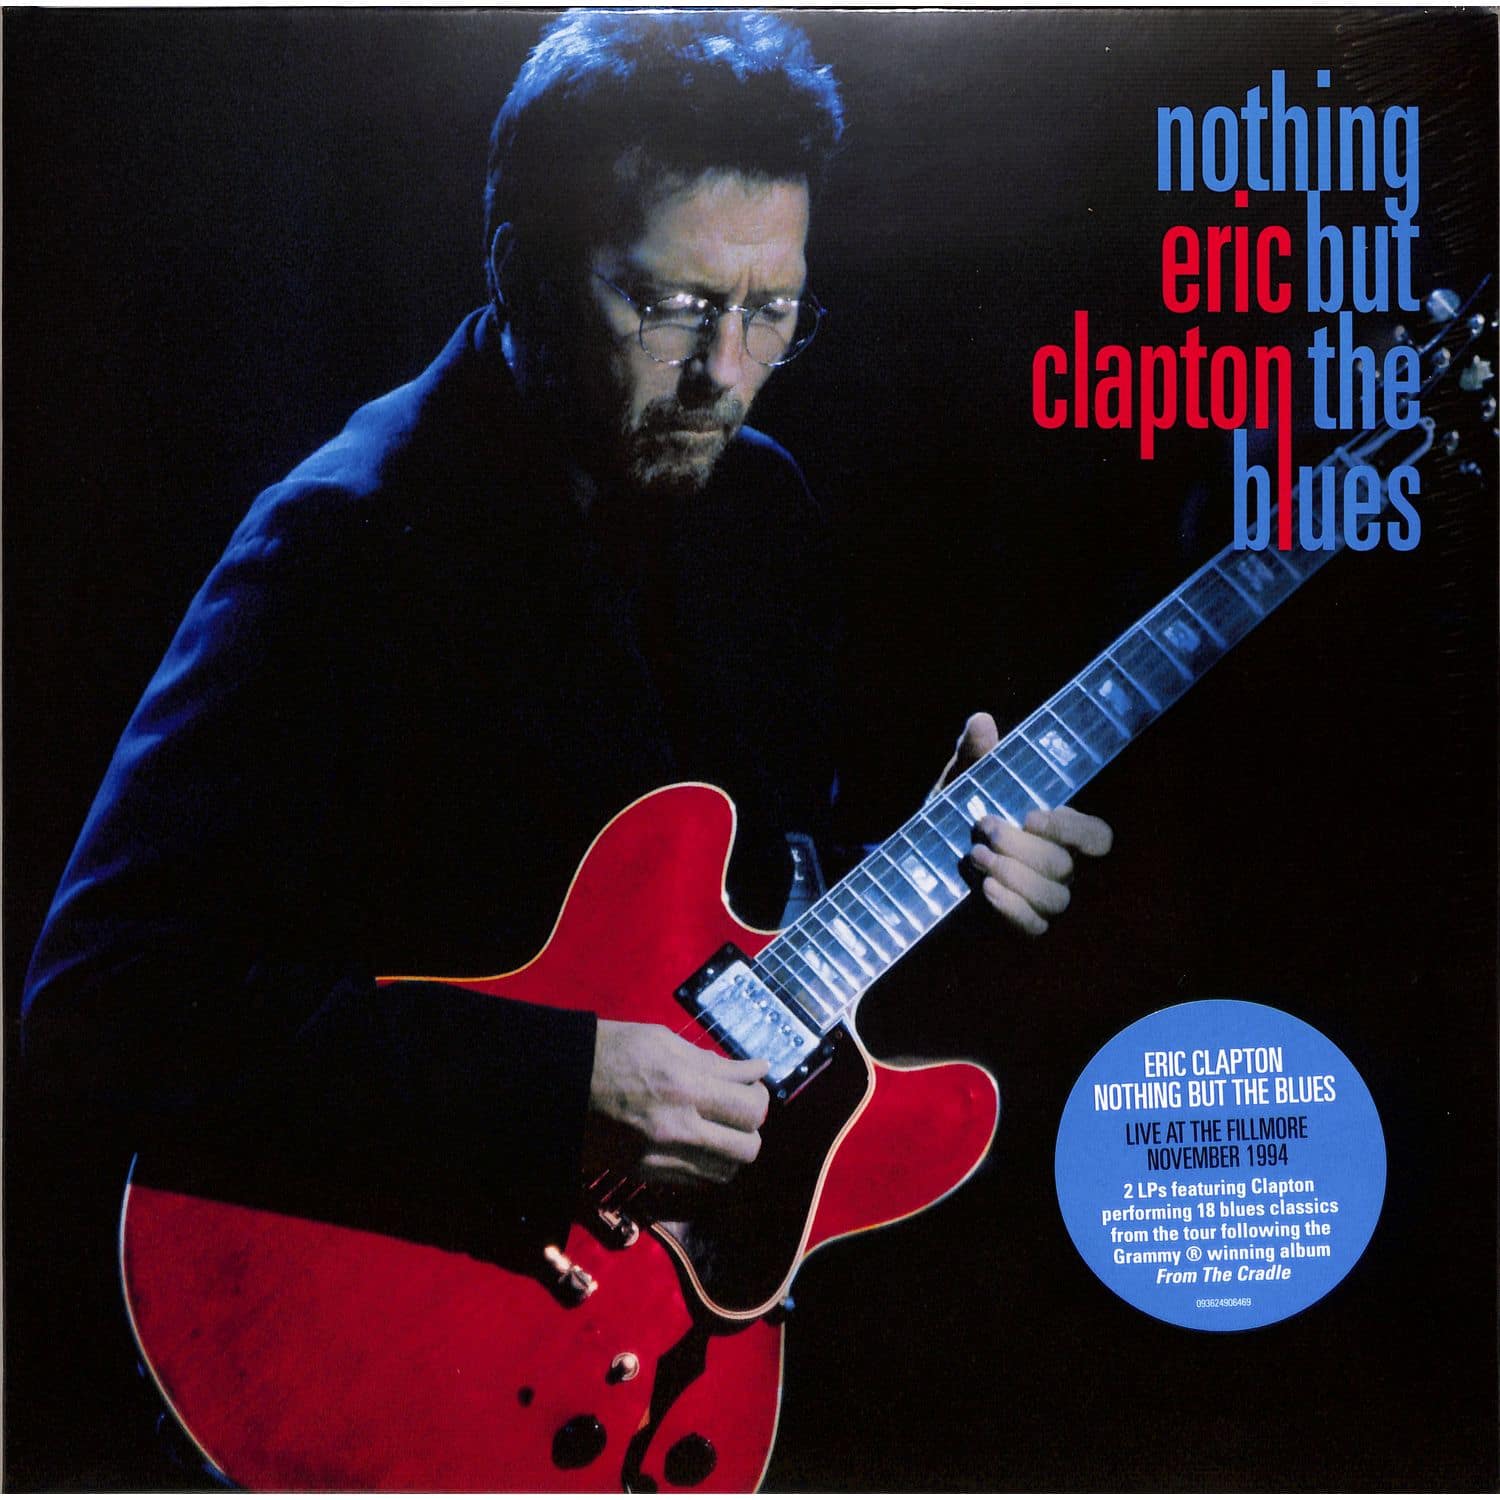 Eric Clapton - NOTHING BUT THE BLUES 